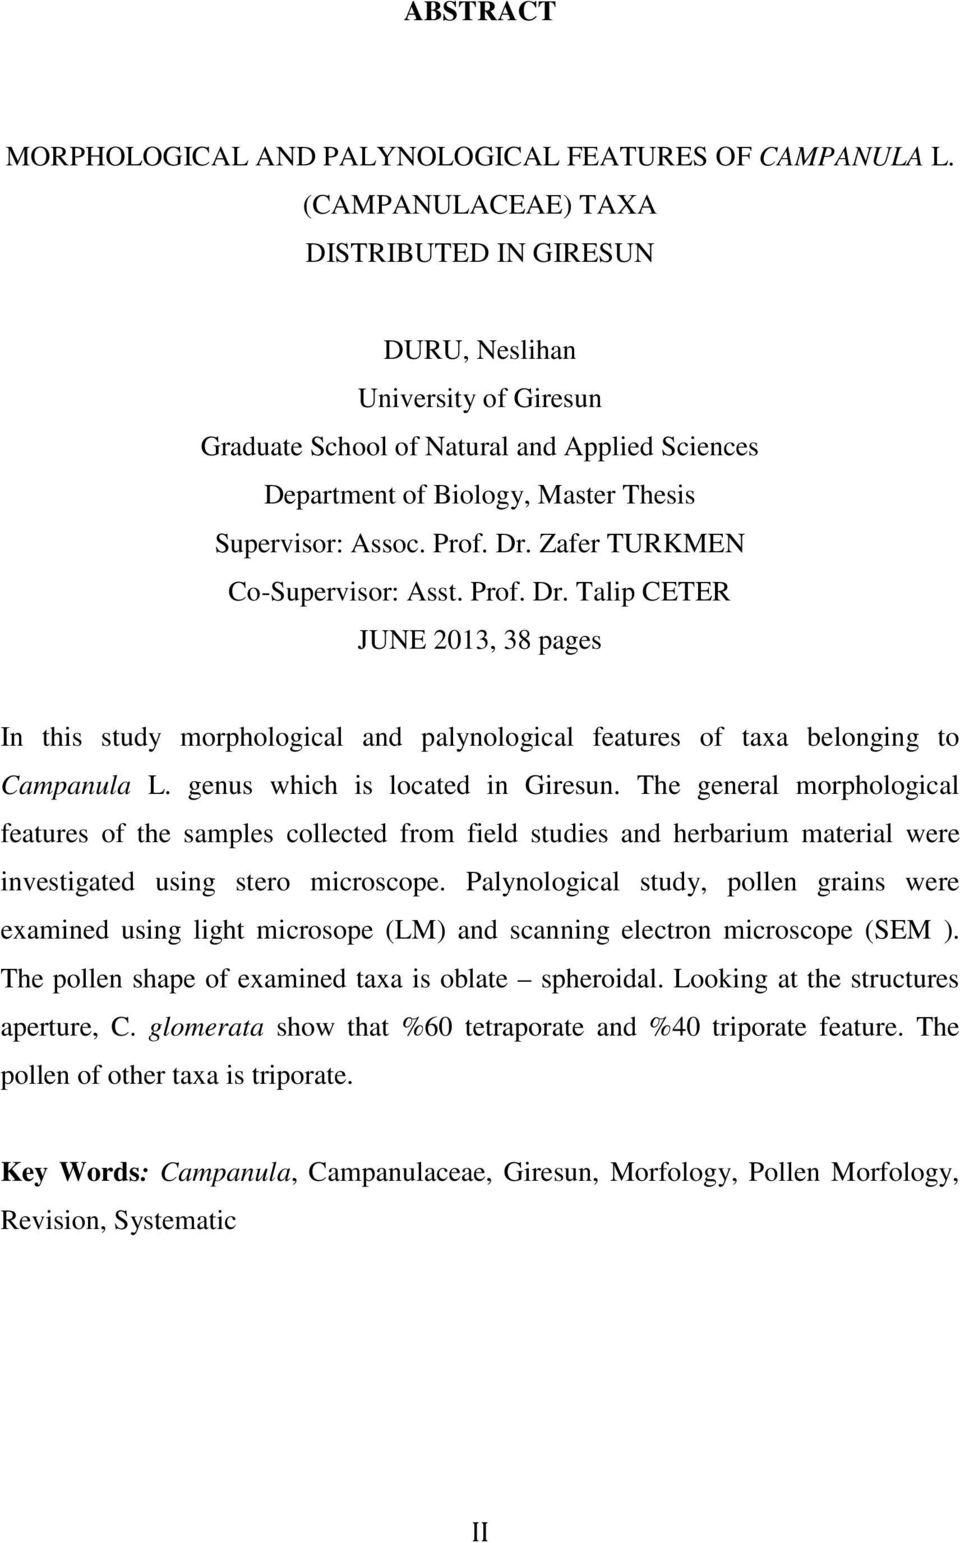 Zafer TURKMEN Co-Supervisor: Asst. Prof. Dr. Talip CETER JUNE 2013, 38 pages In this study morphological and palynological features of taxa belonging to Campanula L. genus which is located in Giresun.